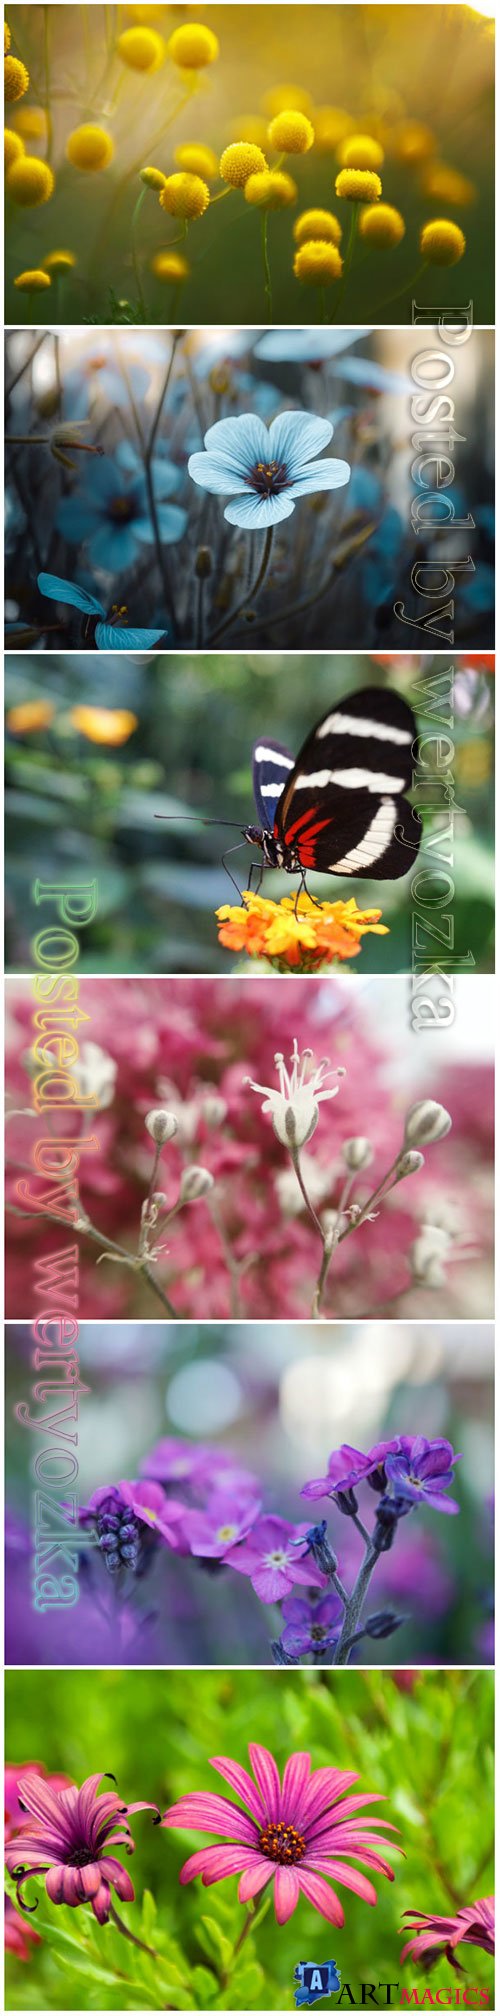 Flowers and butterflies beautiful stock photo